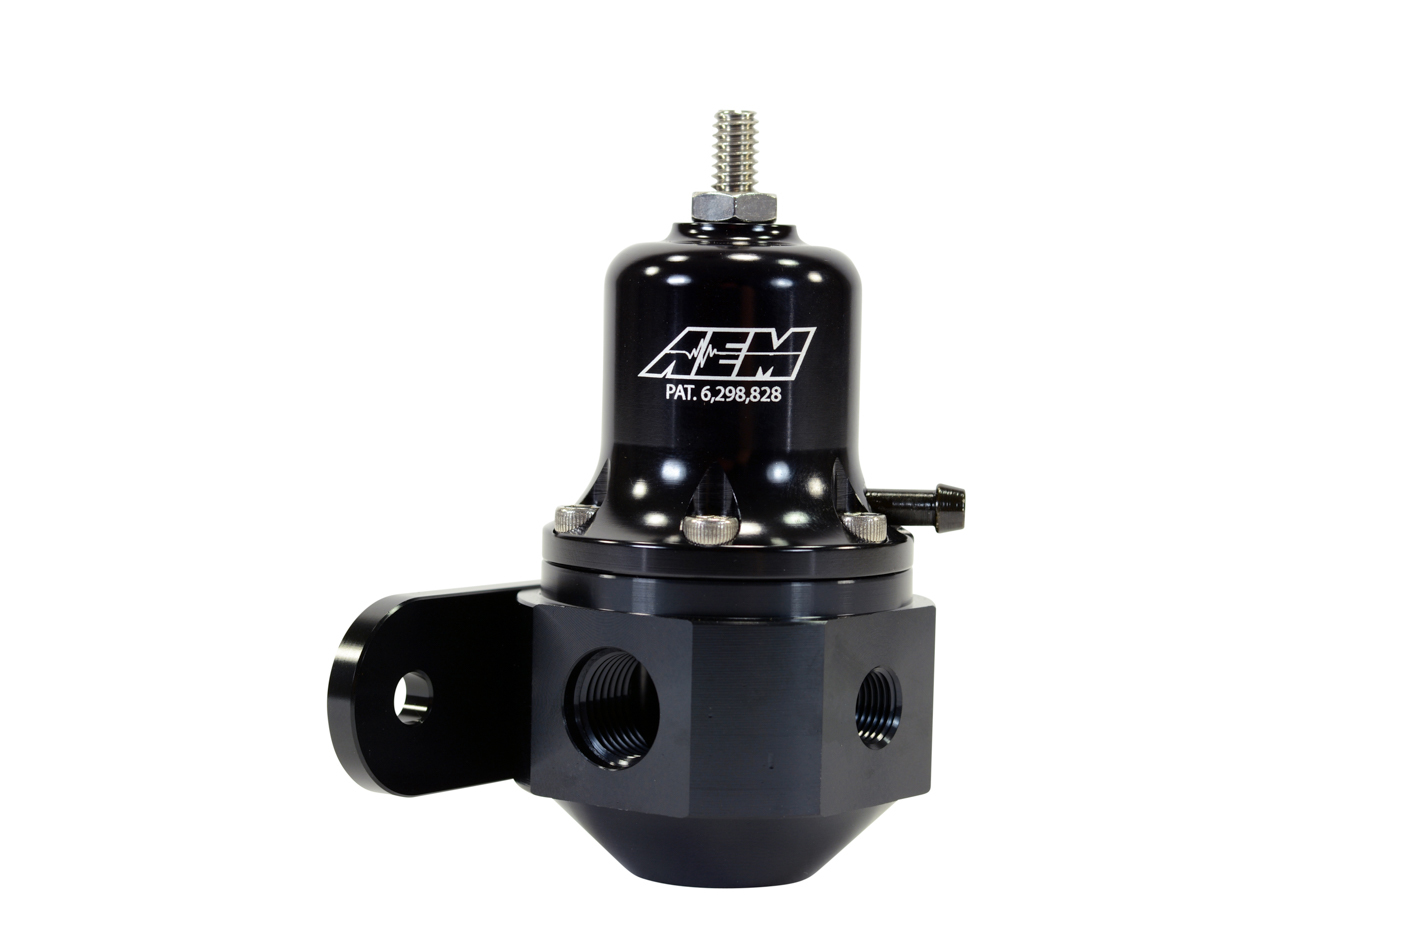 AEM 25-305BK Fuel Pressure Regulator, Adjustable, 40 to 130 psi, 6 AN Female O-Ring Inlet, 6 AN Female O-Ring Outlet, 6 AN Female O-Ring Return, 1/8 in NPT Port, Aluminum, Black Anodized, E85 / Gas / Methanol, Each